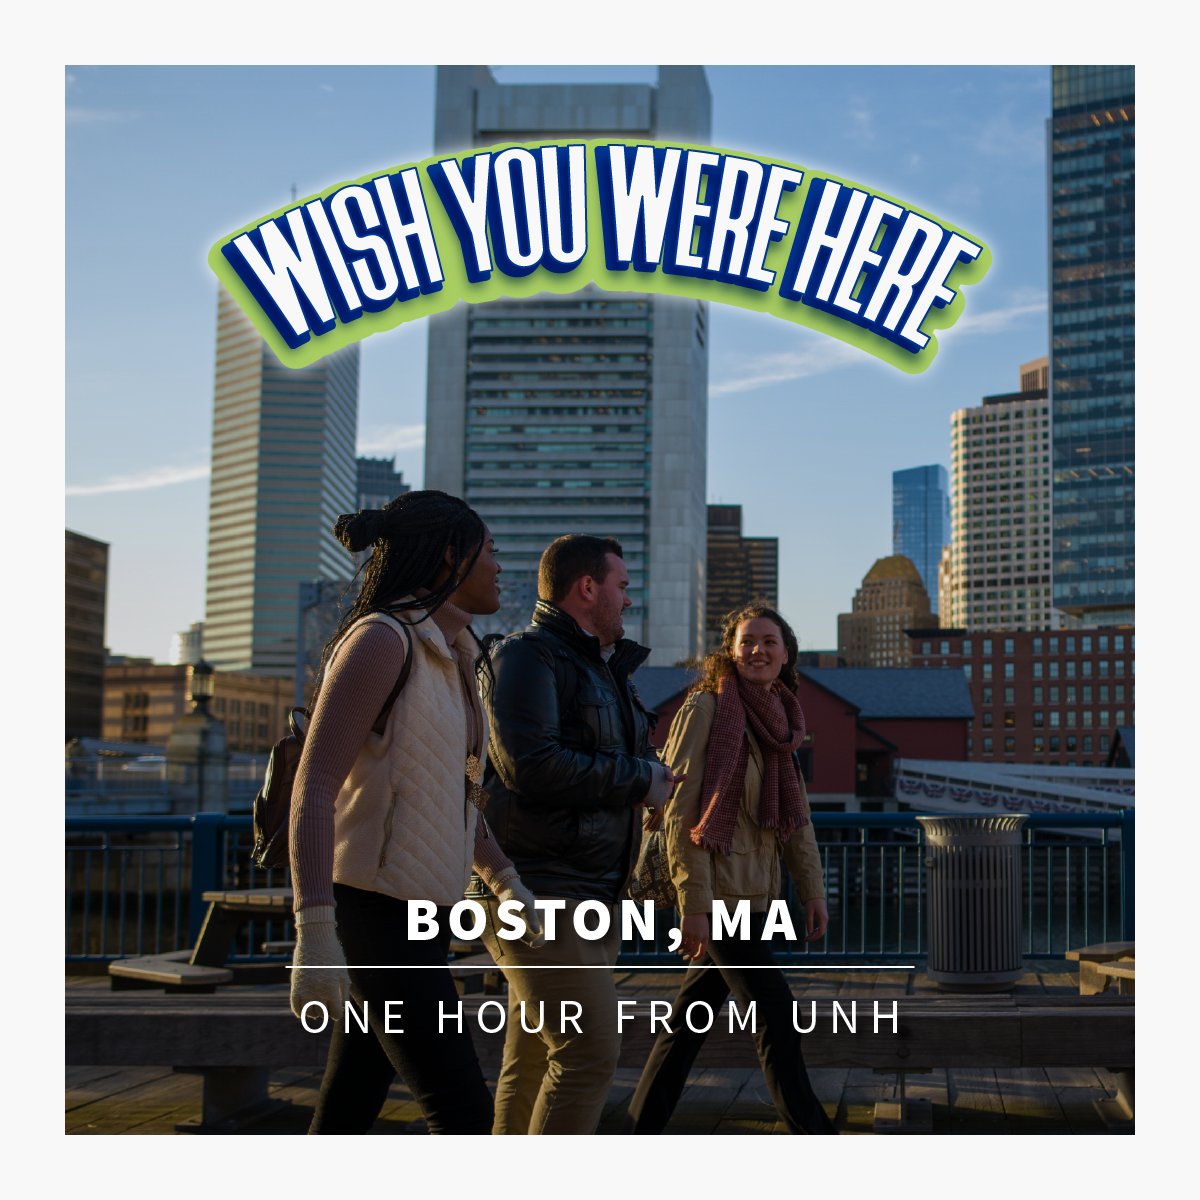 UNH is 1 Hour from Boston! Students can get there on @RideRail, located right on campus! Students love being able to visit Boston for the museums, sporting events, and internships like Semester in the City. #ThisIsUNH